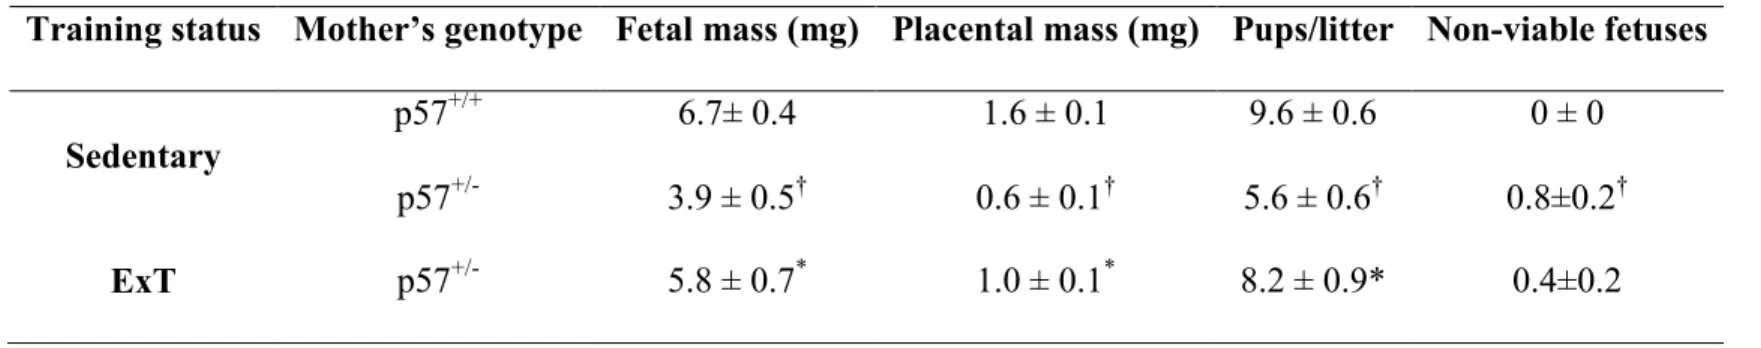 Table 3: ExT normalizes IUGR, placental mass and litter size 